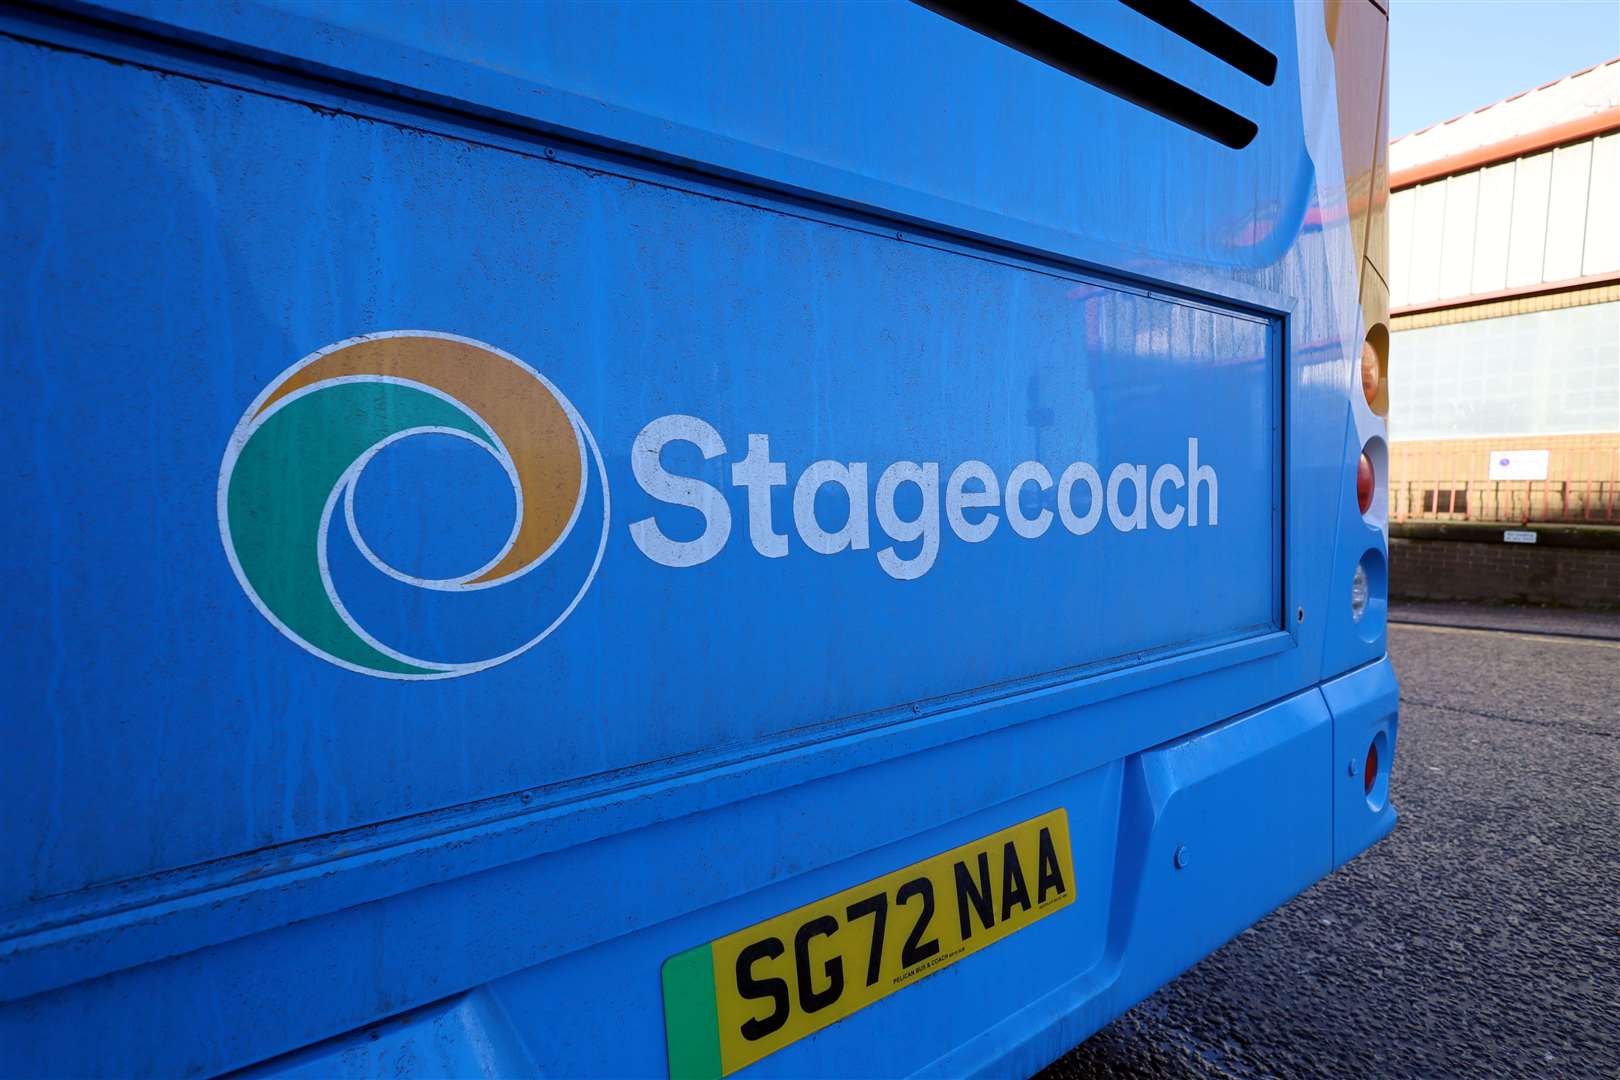 Stagecoach services continue to draw comment.